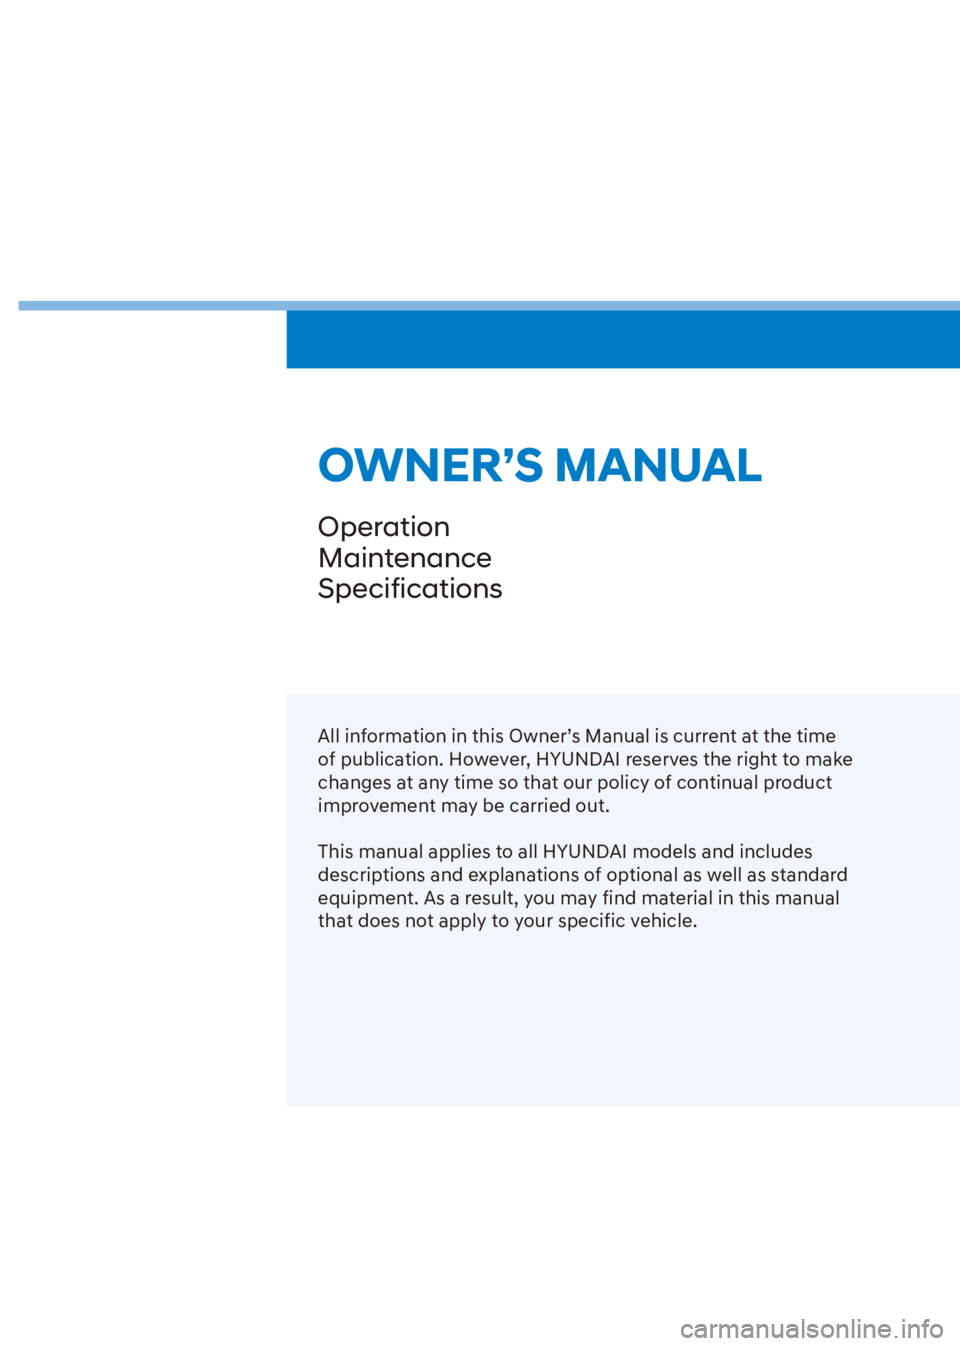 HYUNDAI VENUE 2021  Owners Manual OWNER’S MANUAL
Operation
Maintenance
Specifications
All information in this Owner’s Manual is current at the time 
of publication. However, HYUNDAI reserves the right to make 
changes at any time 